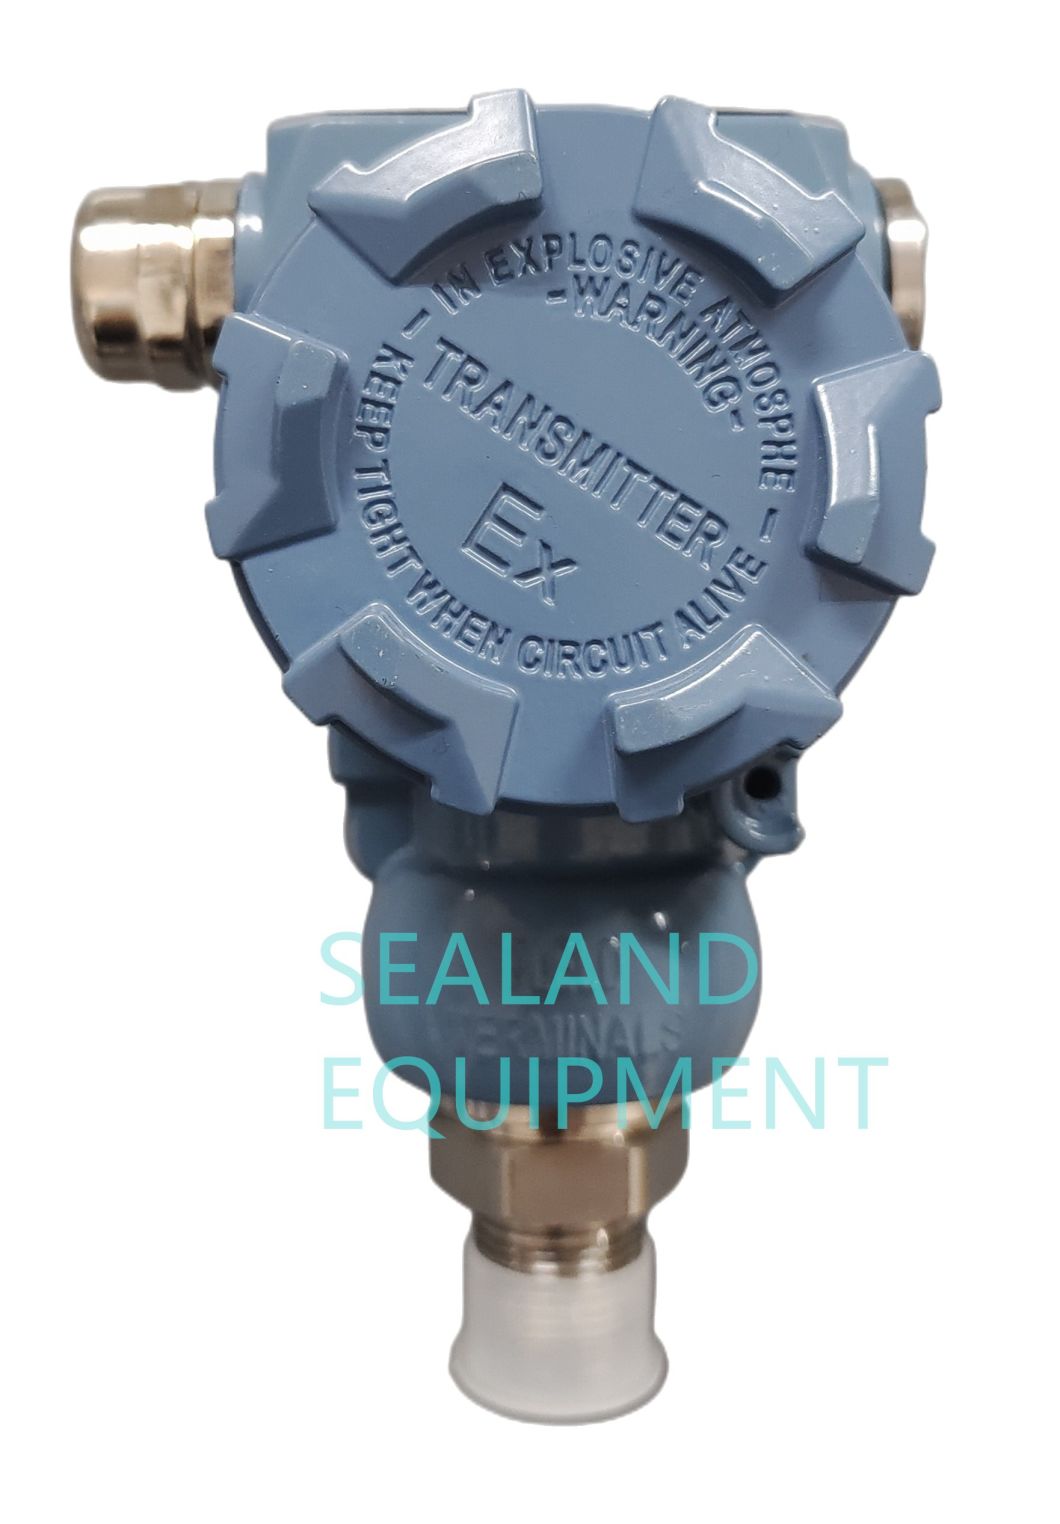 Explosion-Proof 0.1%F. S Pressure Transmitter/Transducer Explosion-Proof 0.1%F. S Pressure Transmitter/Transducer